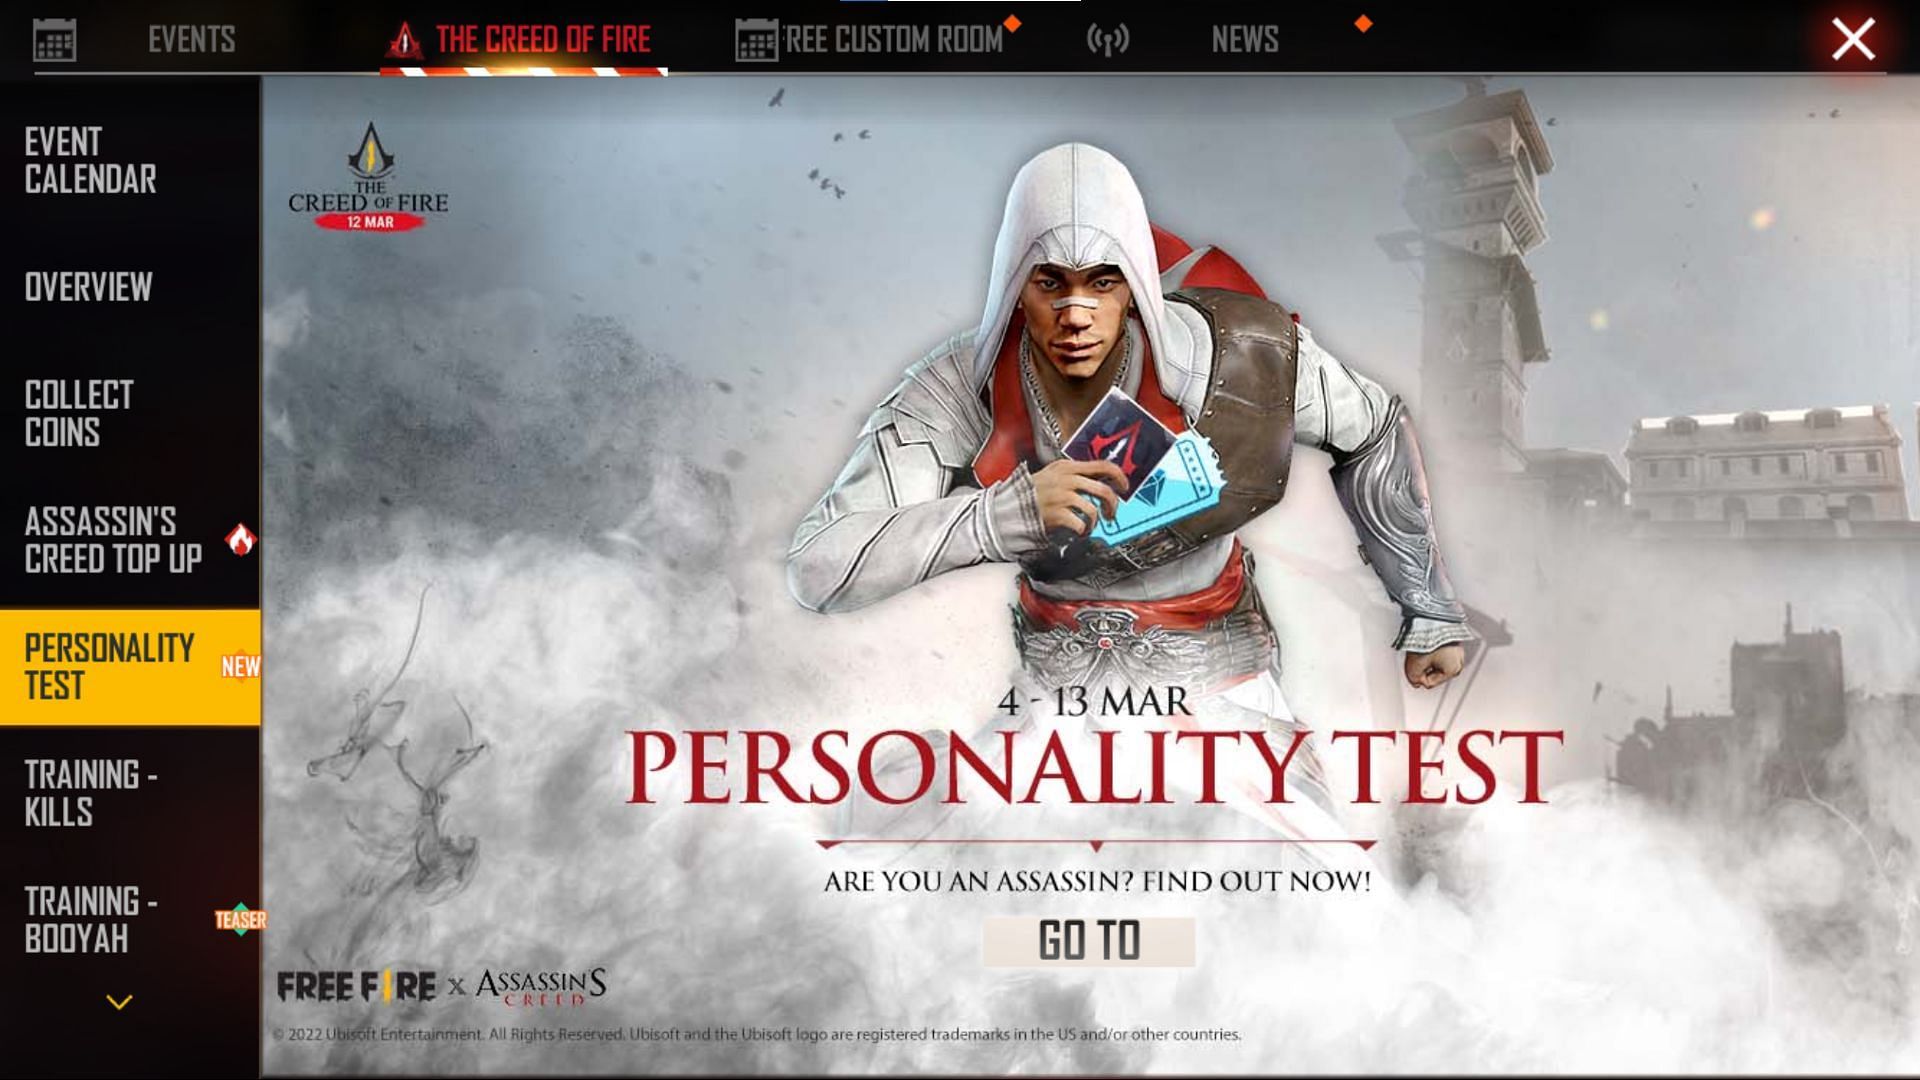 Personality Test is also one of the events (Image via Garena)